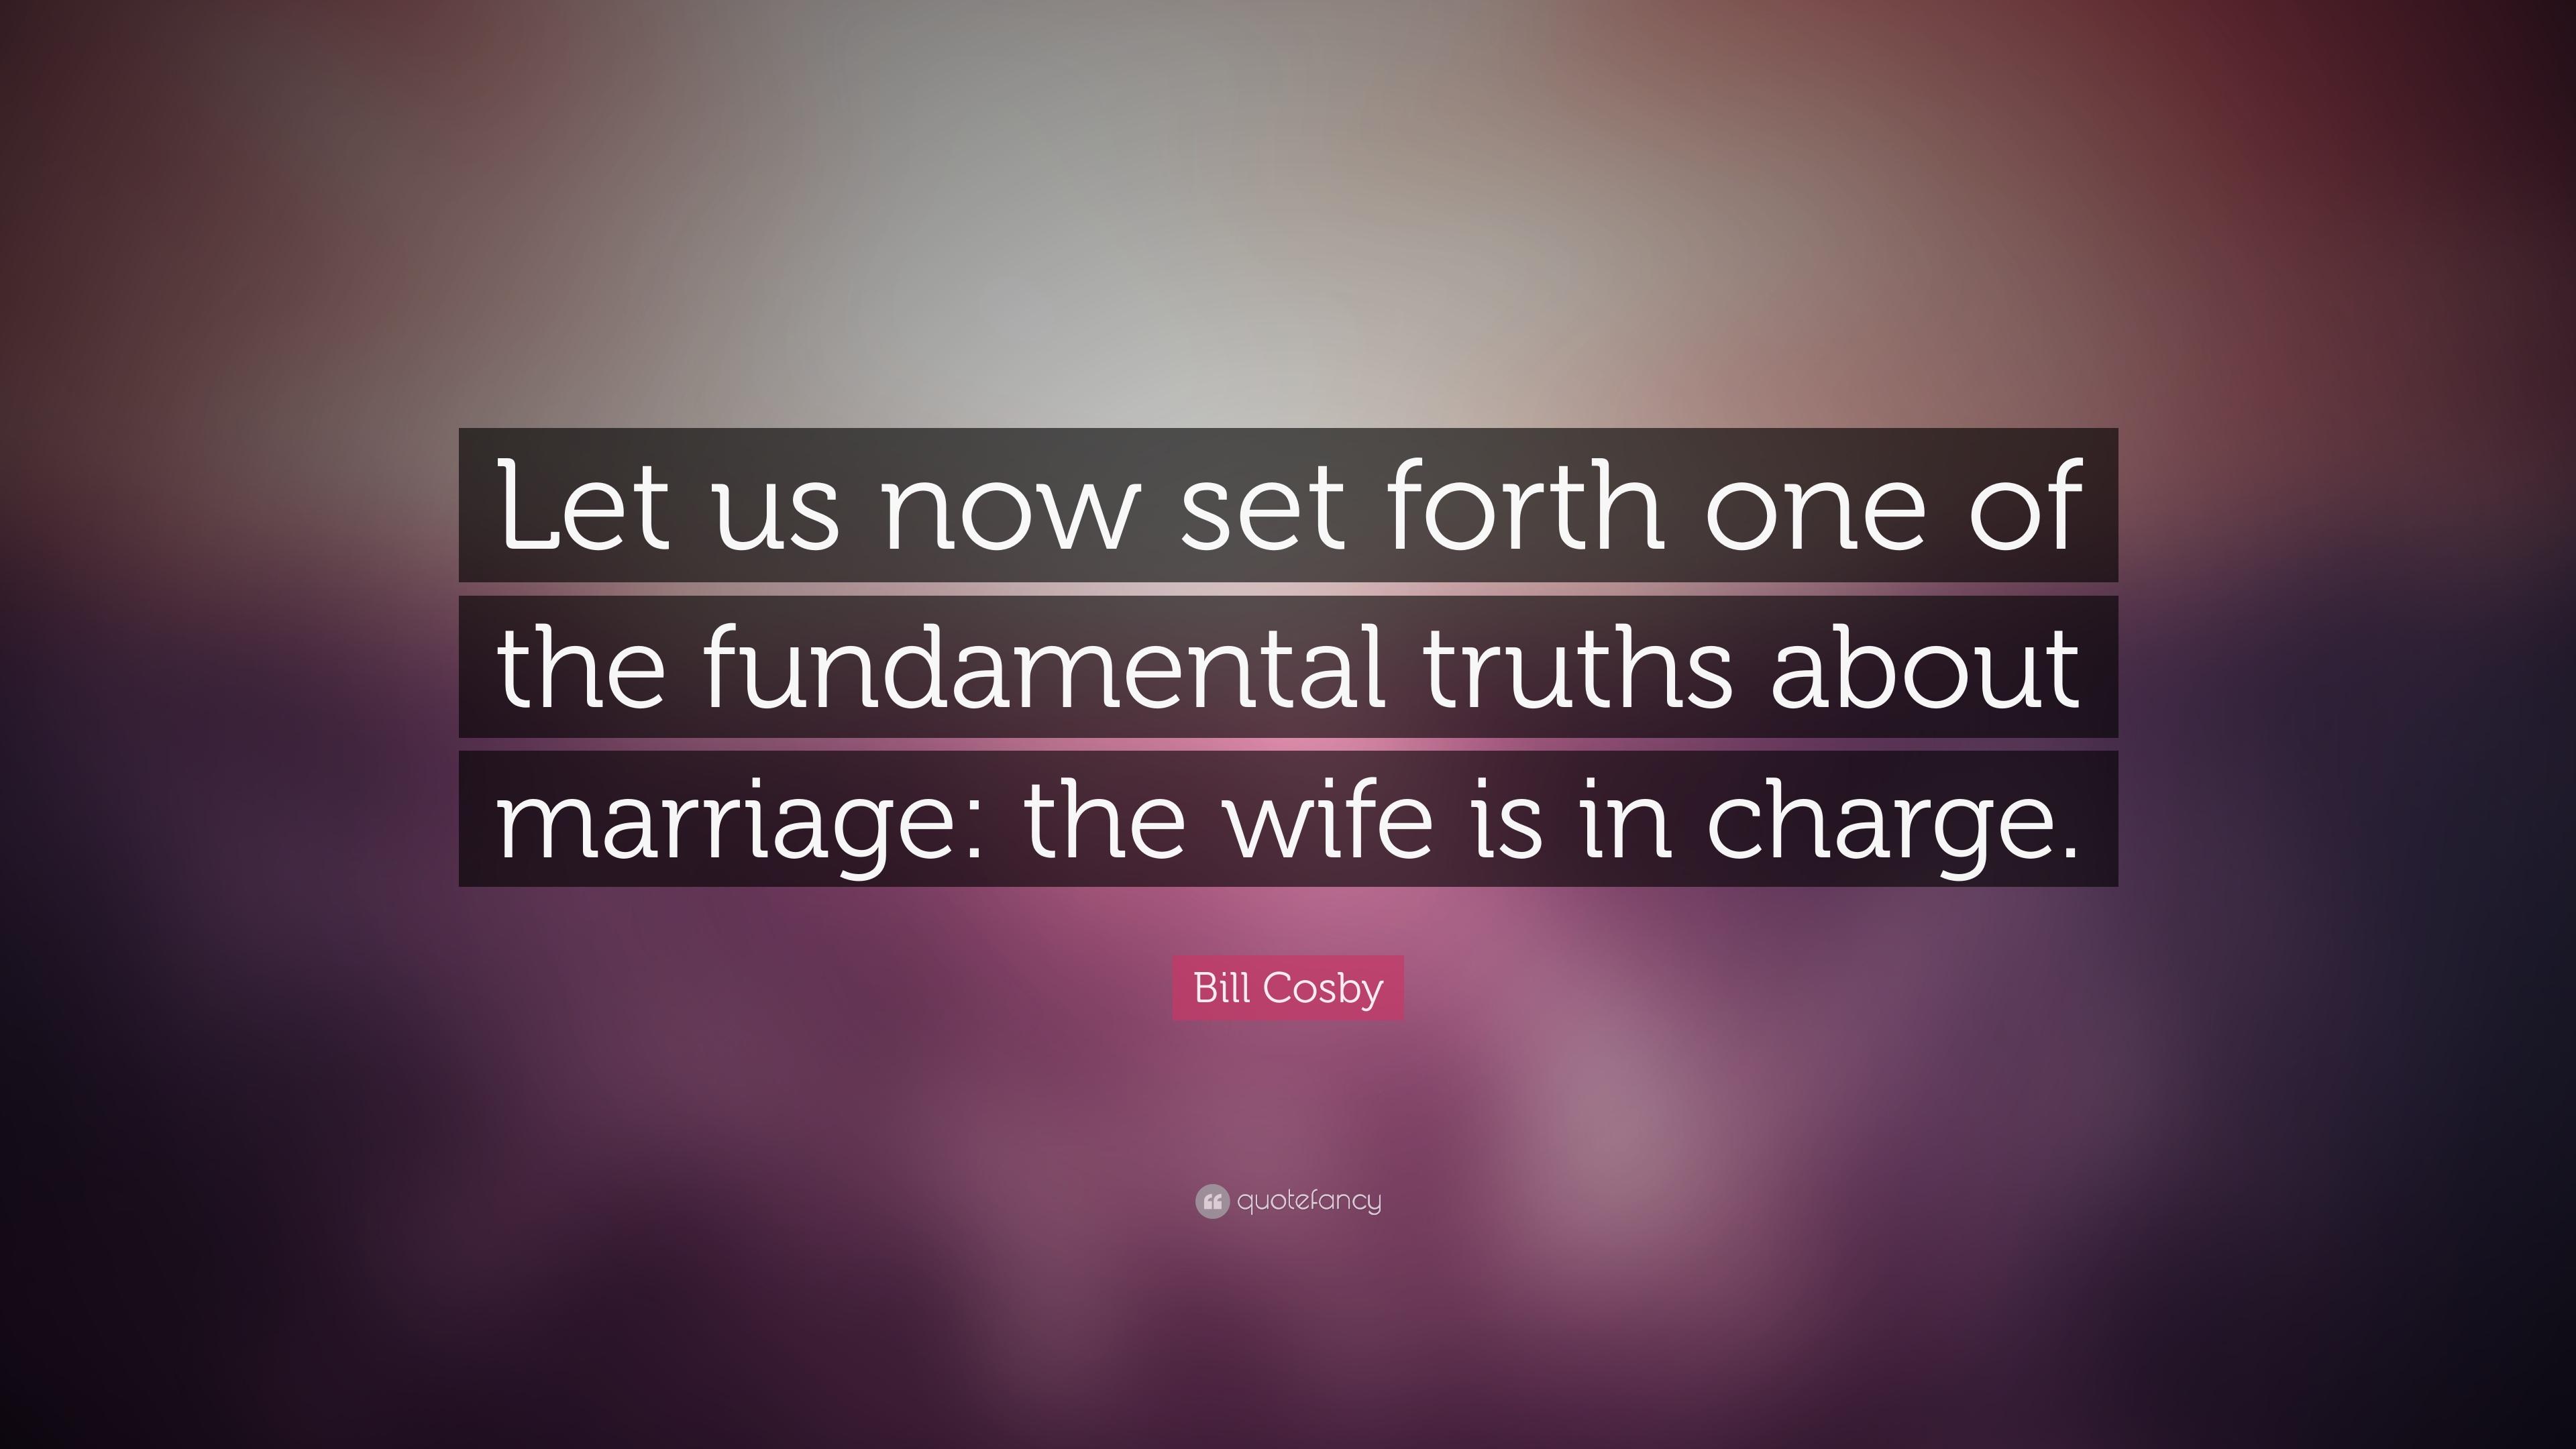 Marriage The Love Of My Life Quotes. Best Quotes for your Life